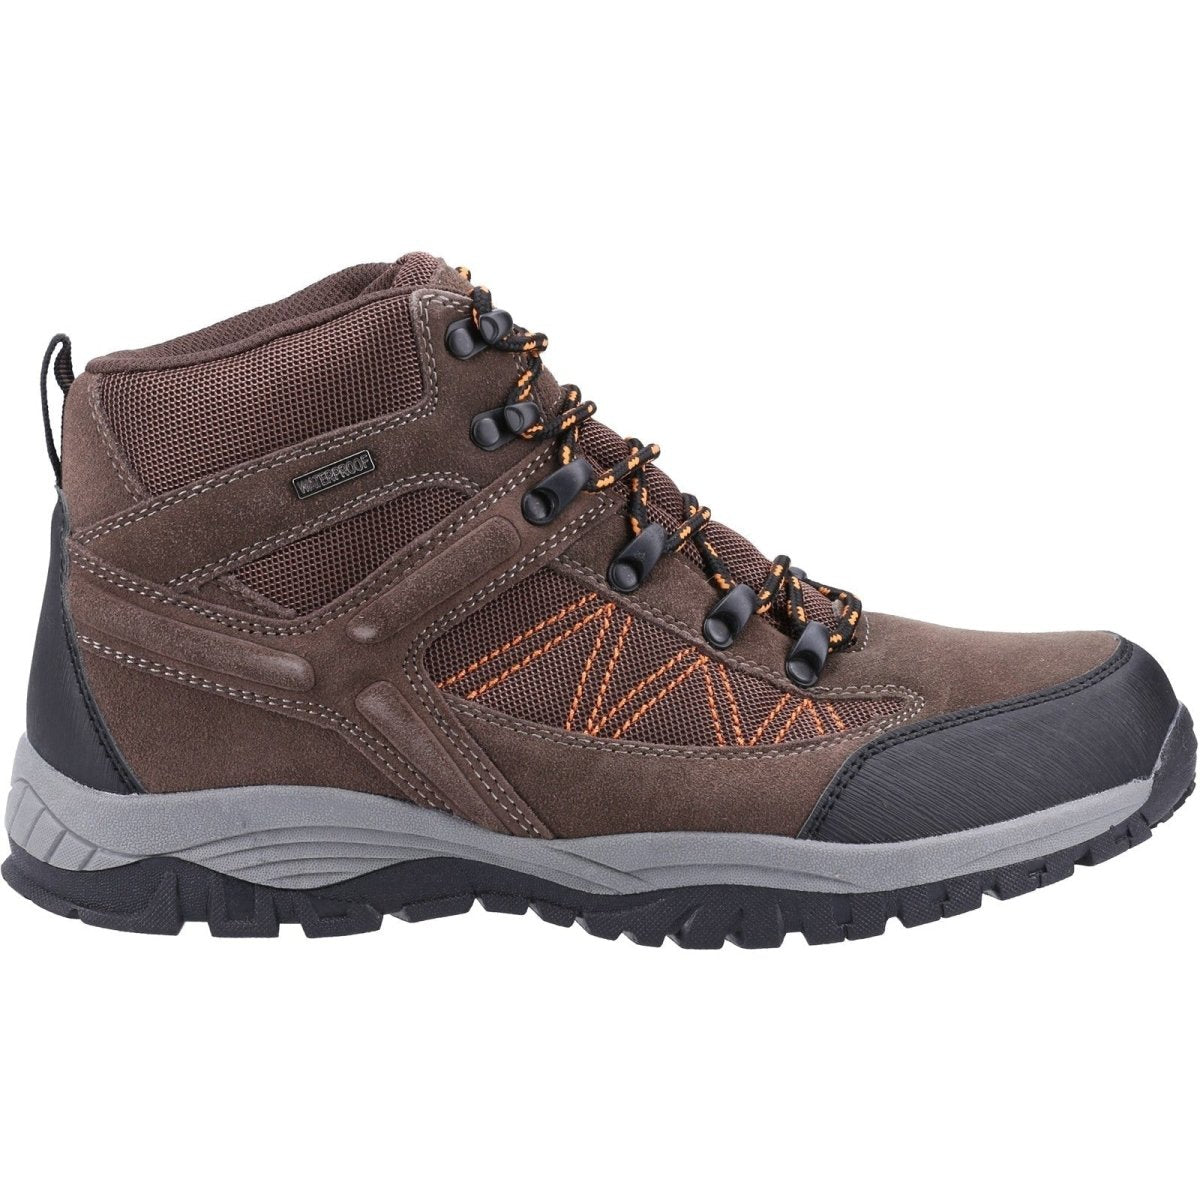 Cotswold Maisemore Mens Hiking Boot - Shoe Store Direct